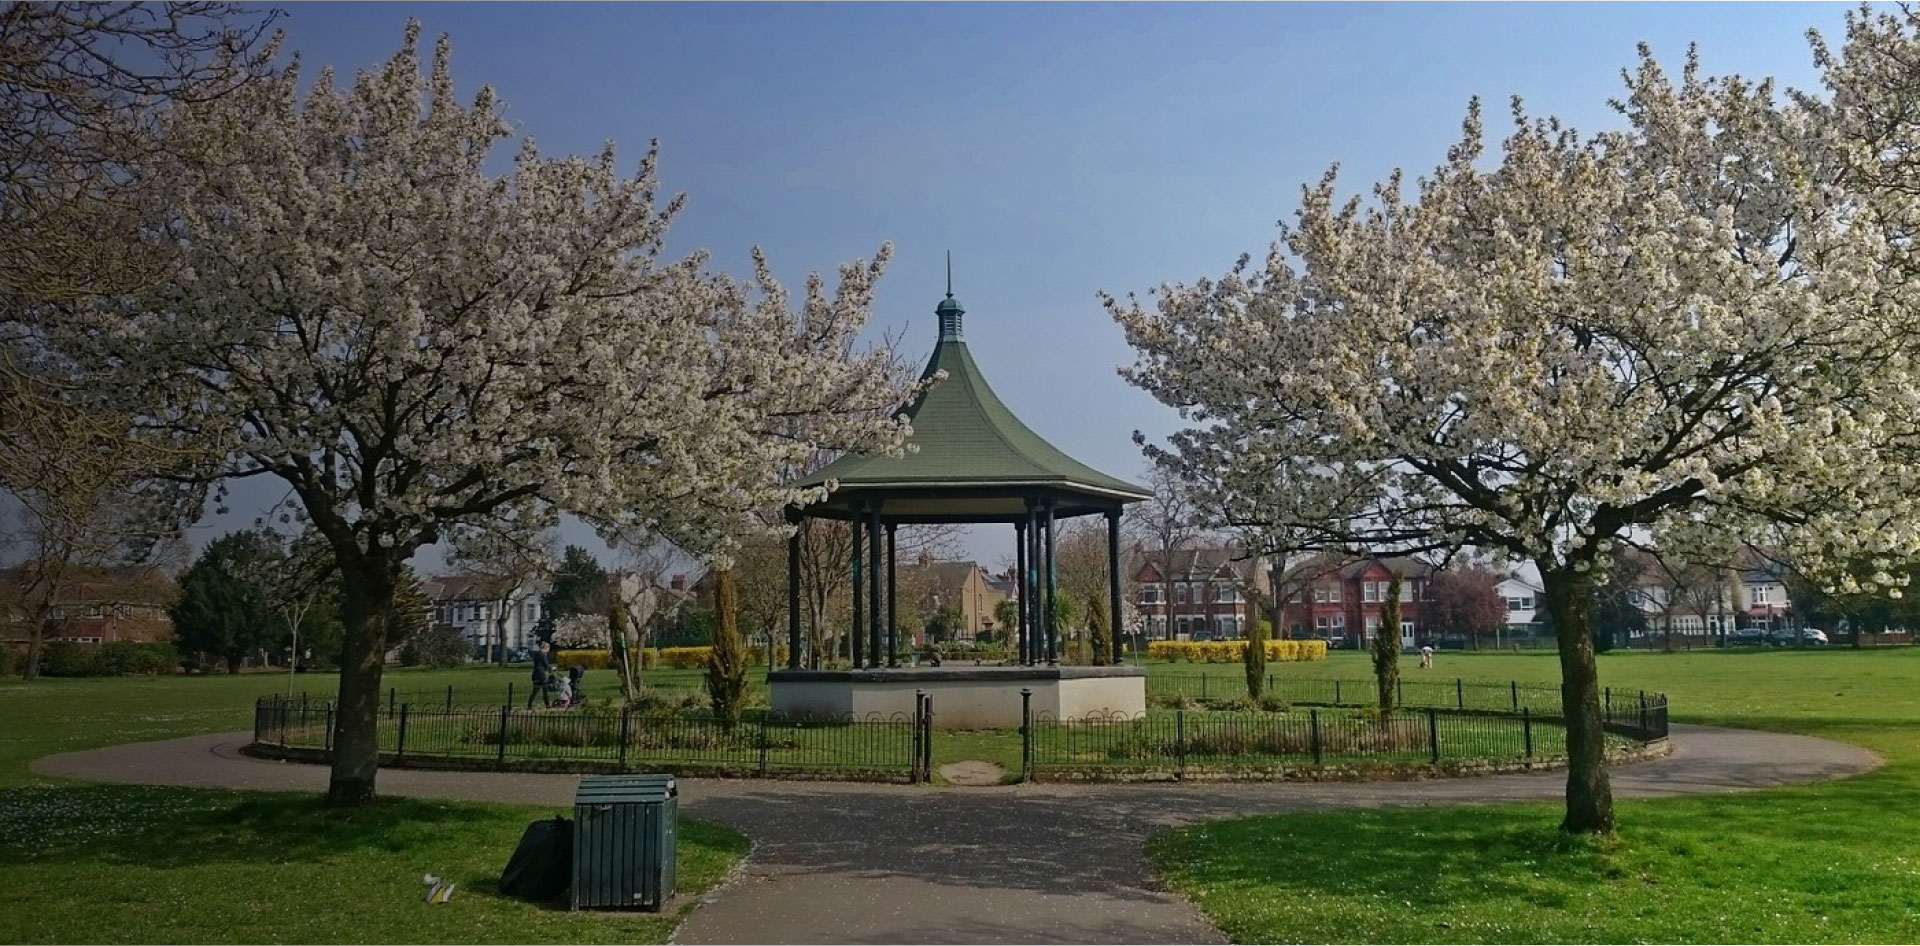 Bandstand in Hanwell